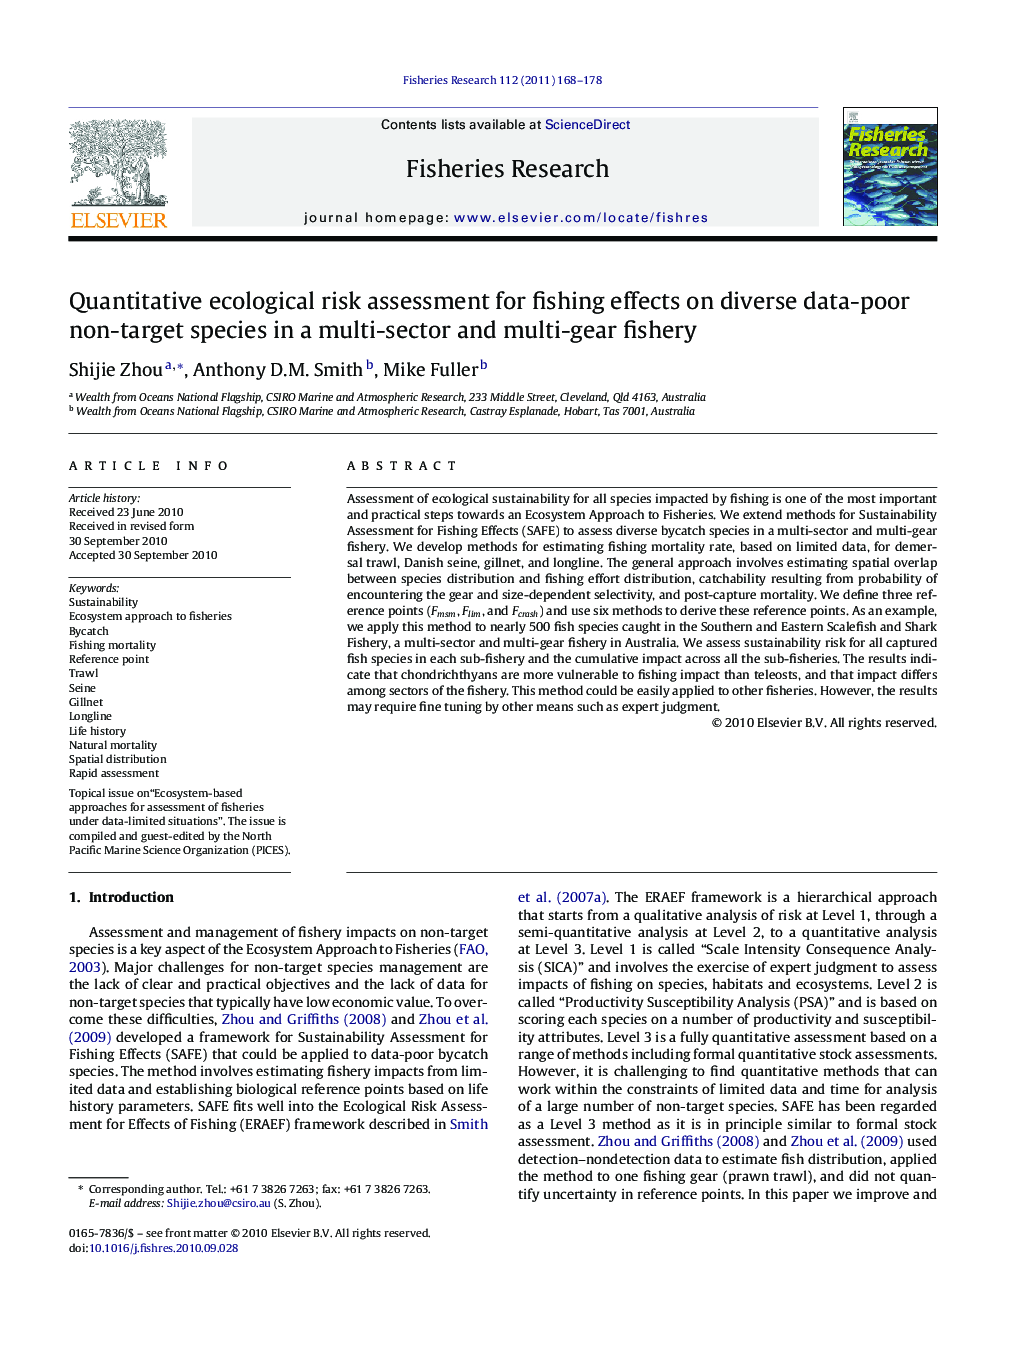 Quantitative ecological risk assessment for fishing effects on diverse data-poor non-target species in a multi-sector and multi-gear fishery